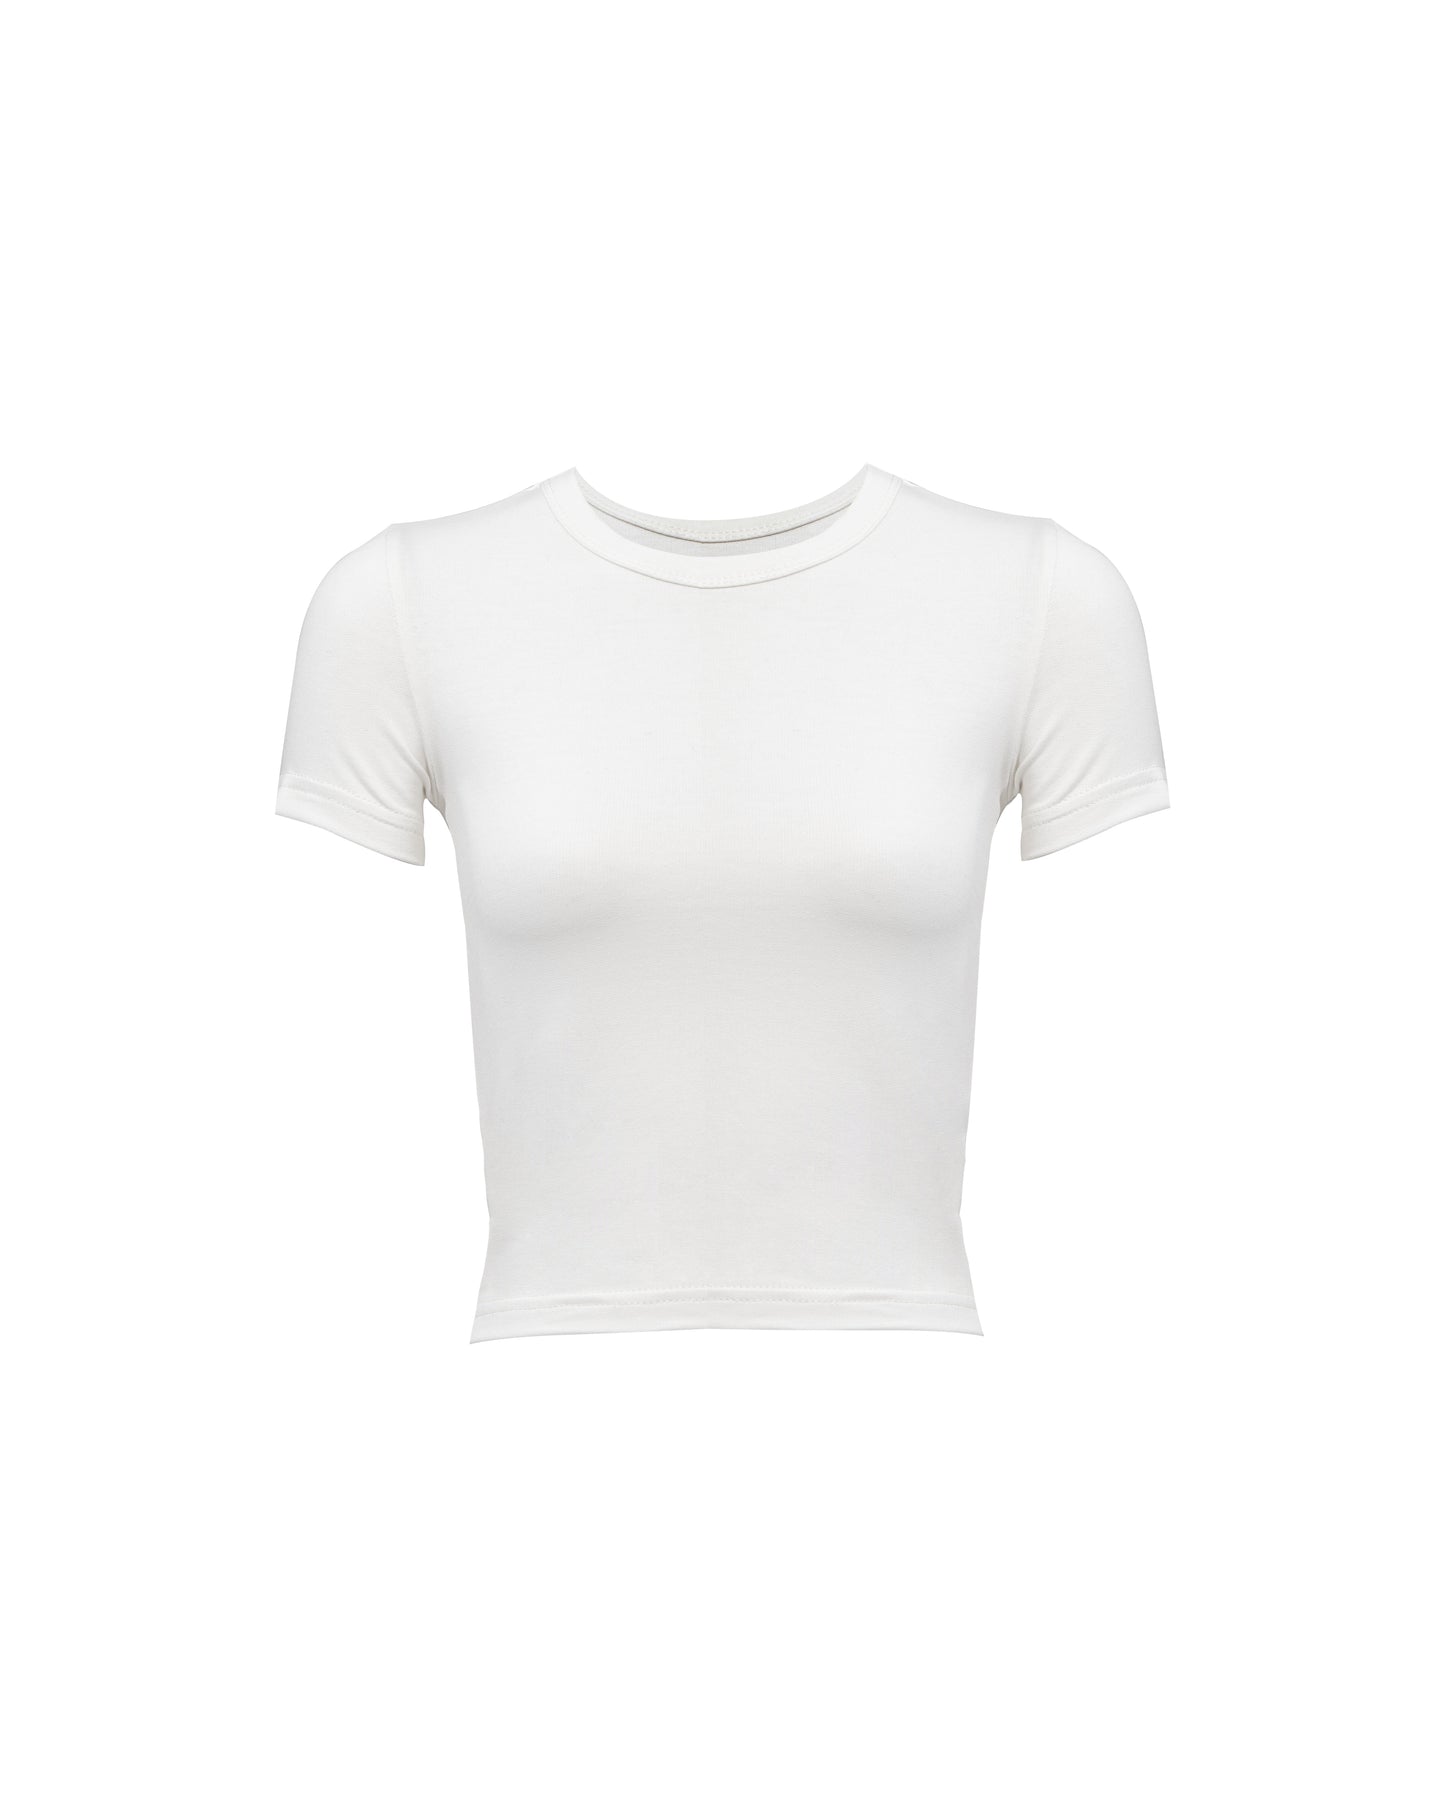 WHITE COTTON - SHORT SLEEVES TOP